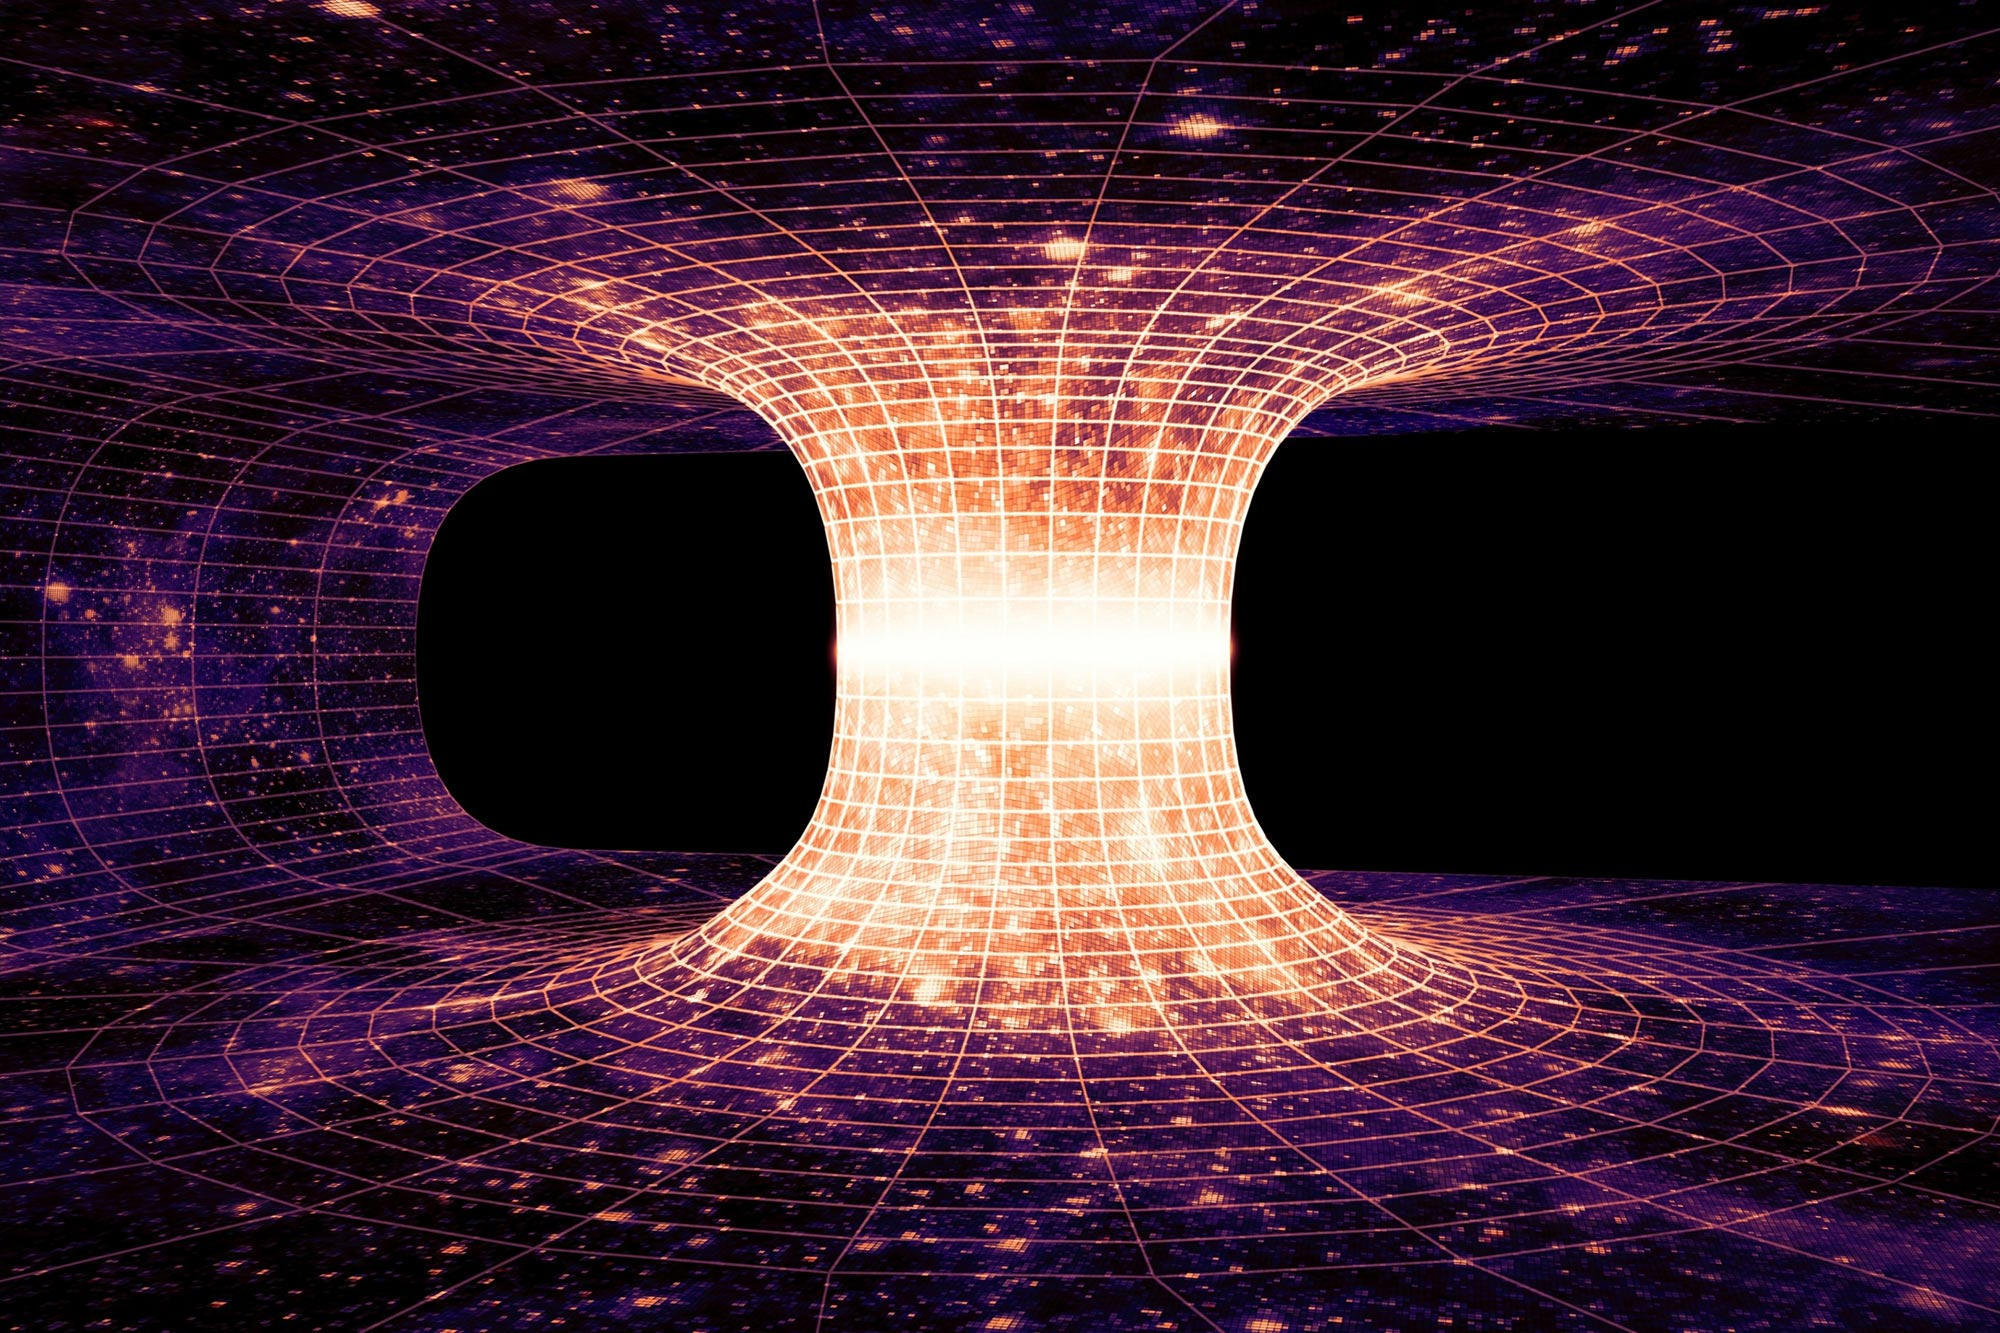 2000x1333 Bridging the Chasm Between Quantum Physics and the Theory of Gravity &acirc;&#128;&#147; &acirc;&#128;&#156;We Have Found a Surprisingly Simple Solution&acirc;&#128;&#157